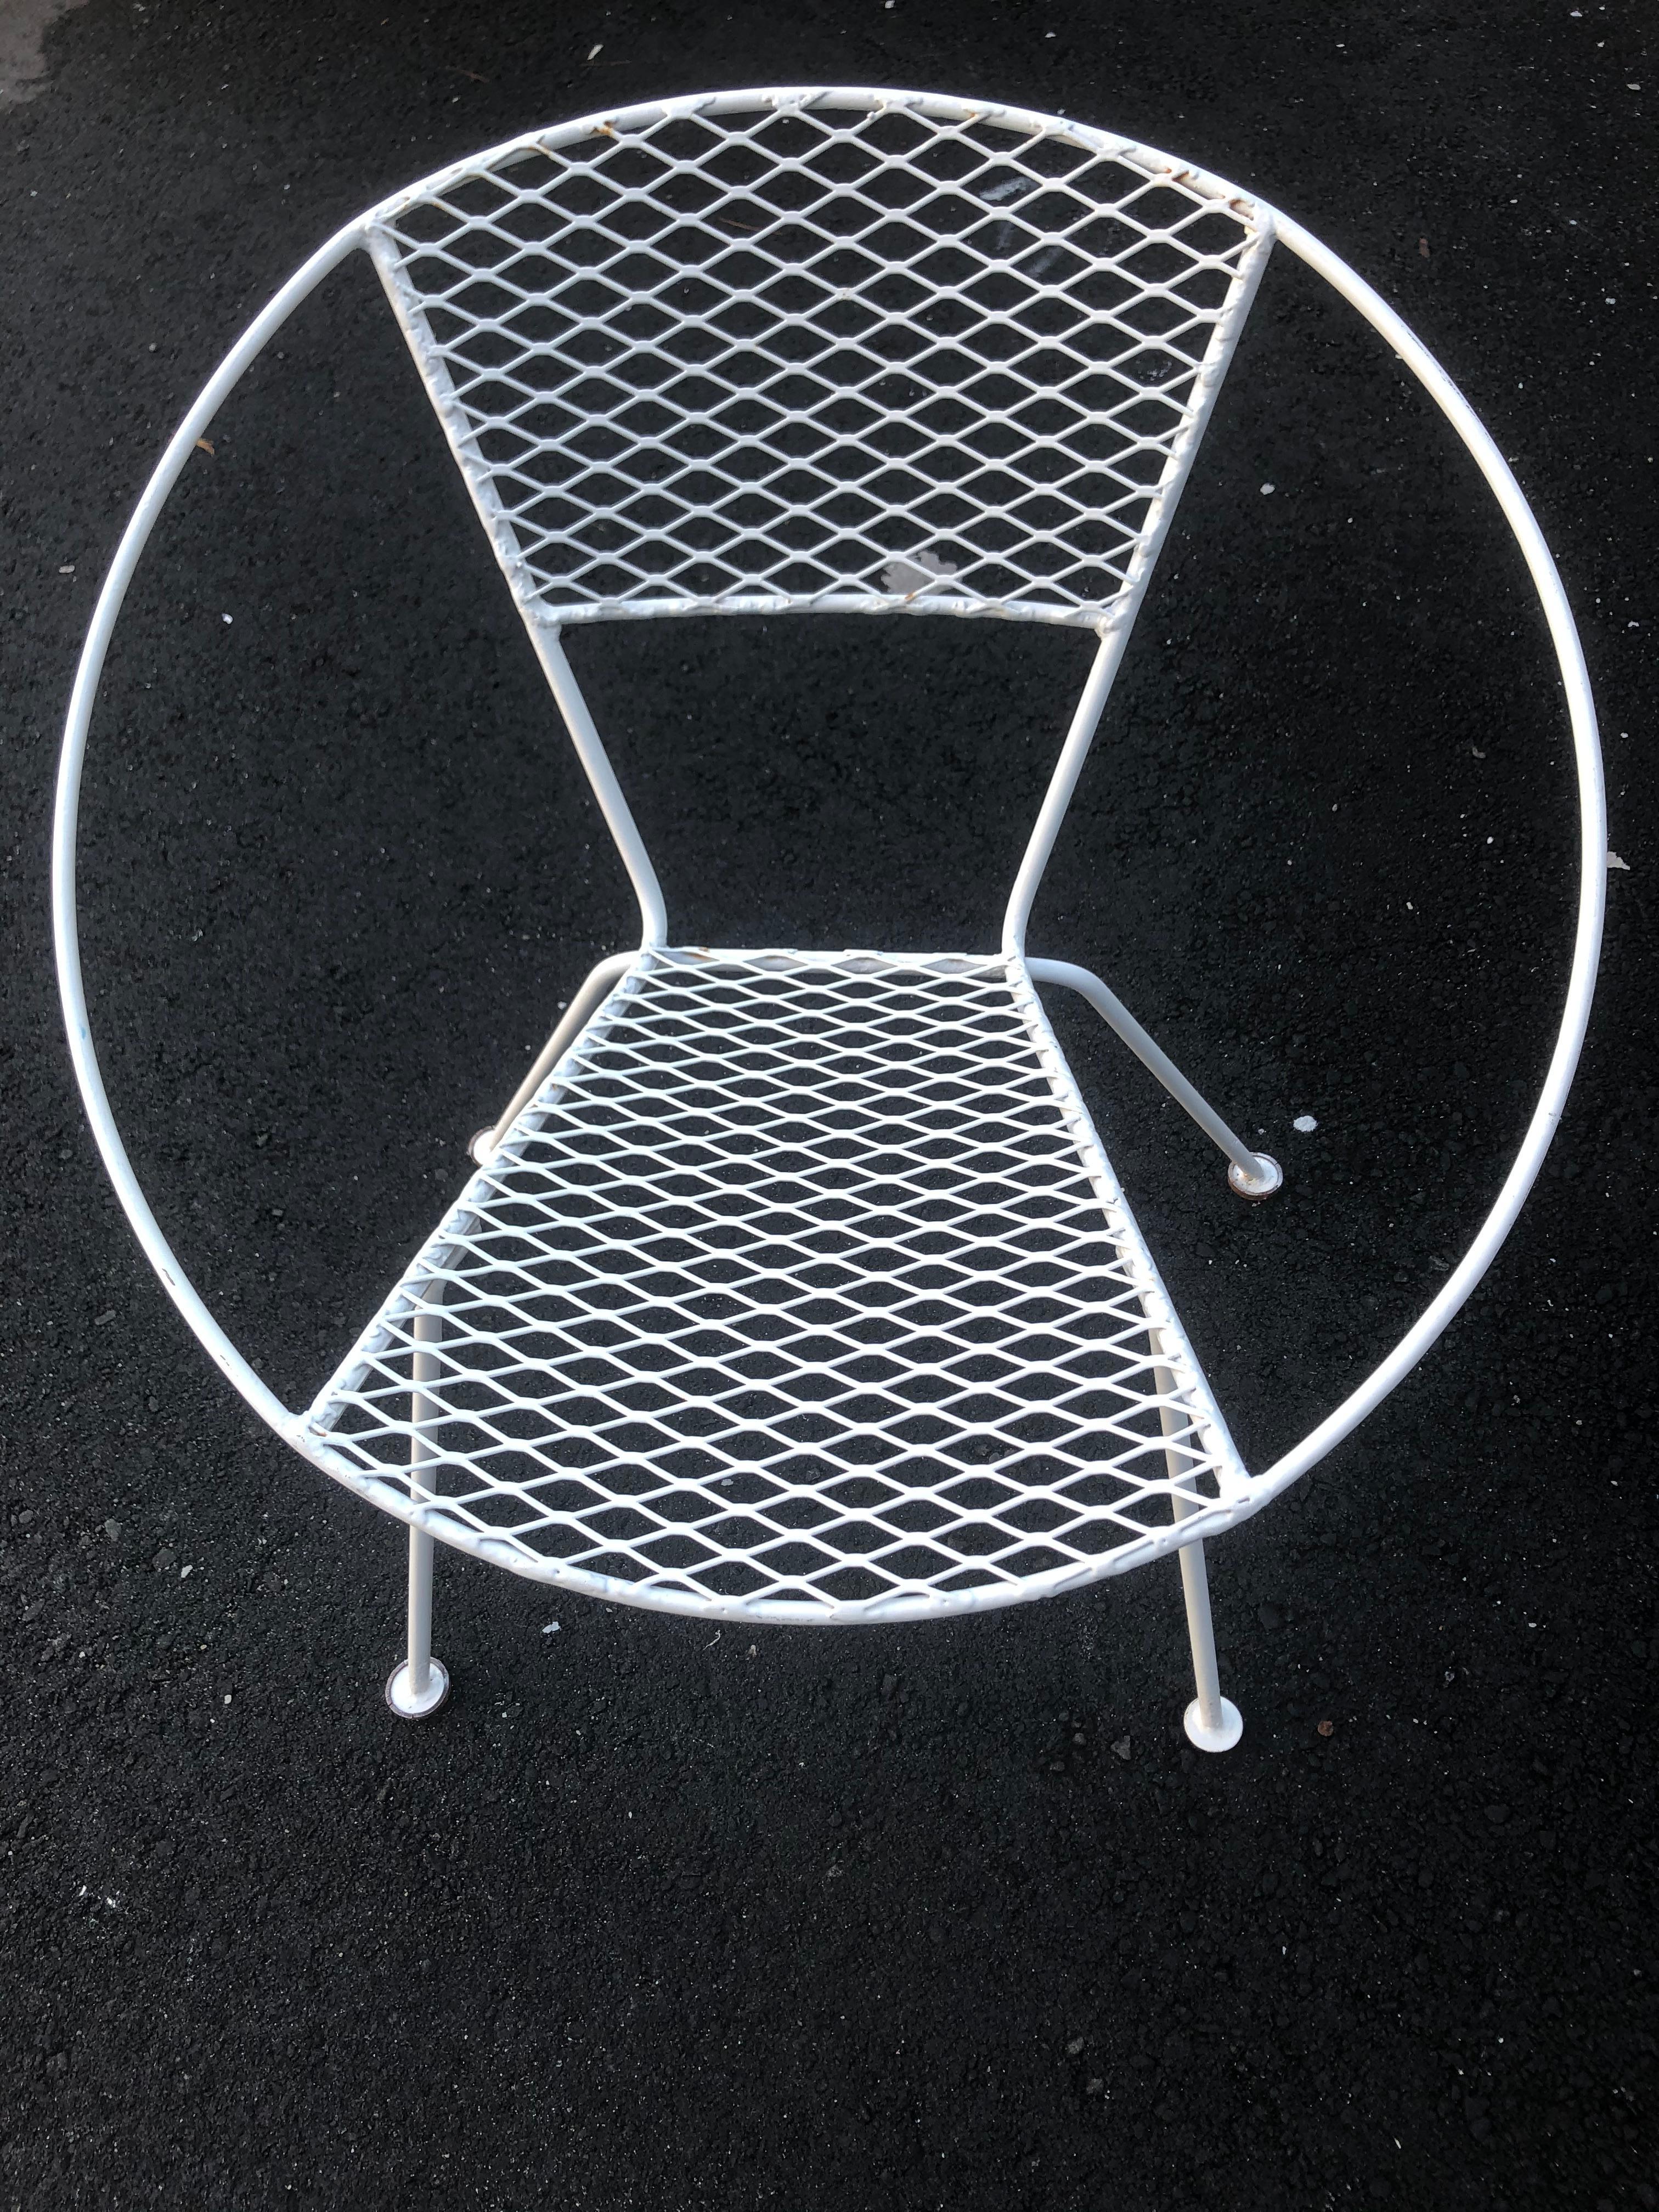 A rare form of Mid-Century Modern chic painted metal patio chairs having an exterior circle with seat suspended inside. Came from a house where there was a huge collection of vintage Knoll furniture, but no markings. Still super cool !